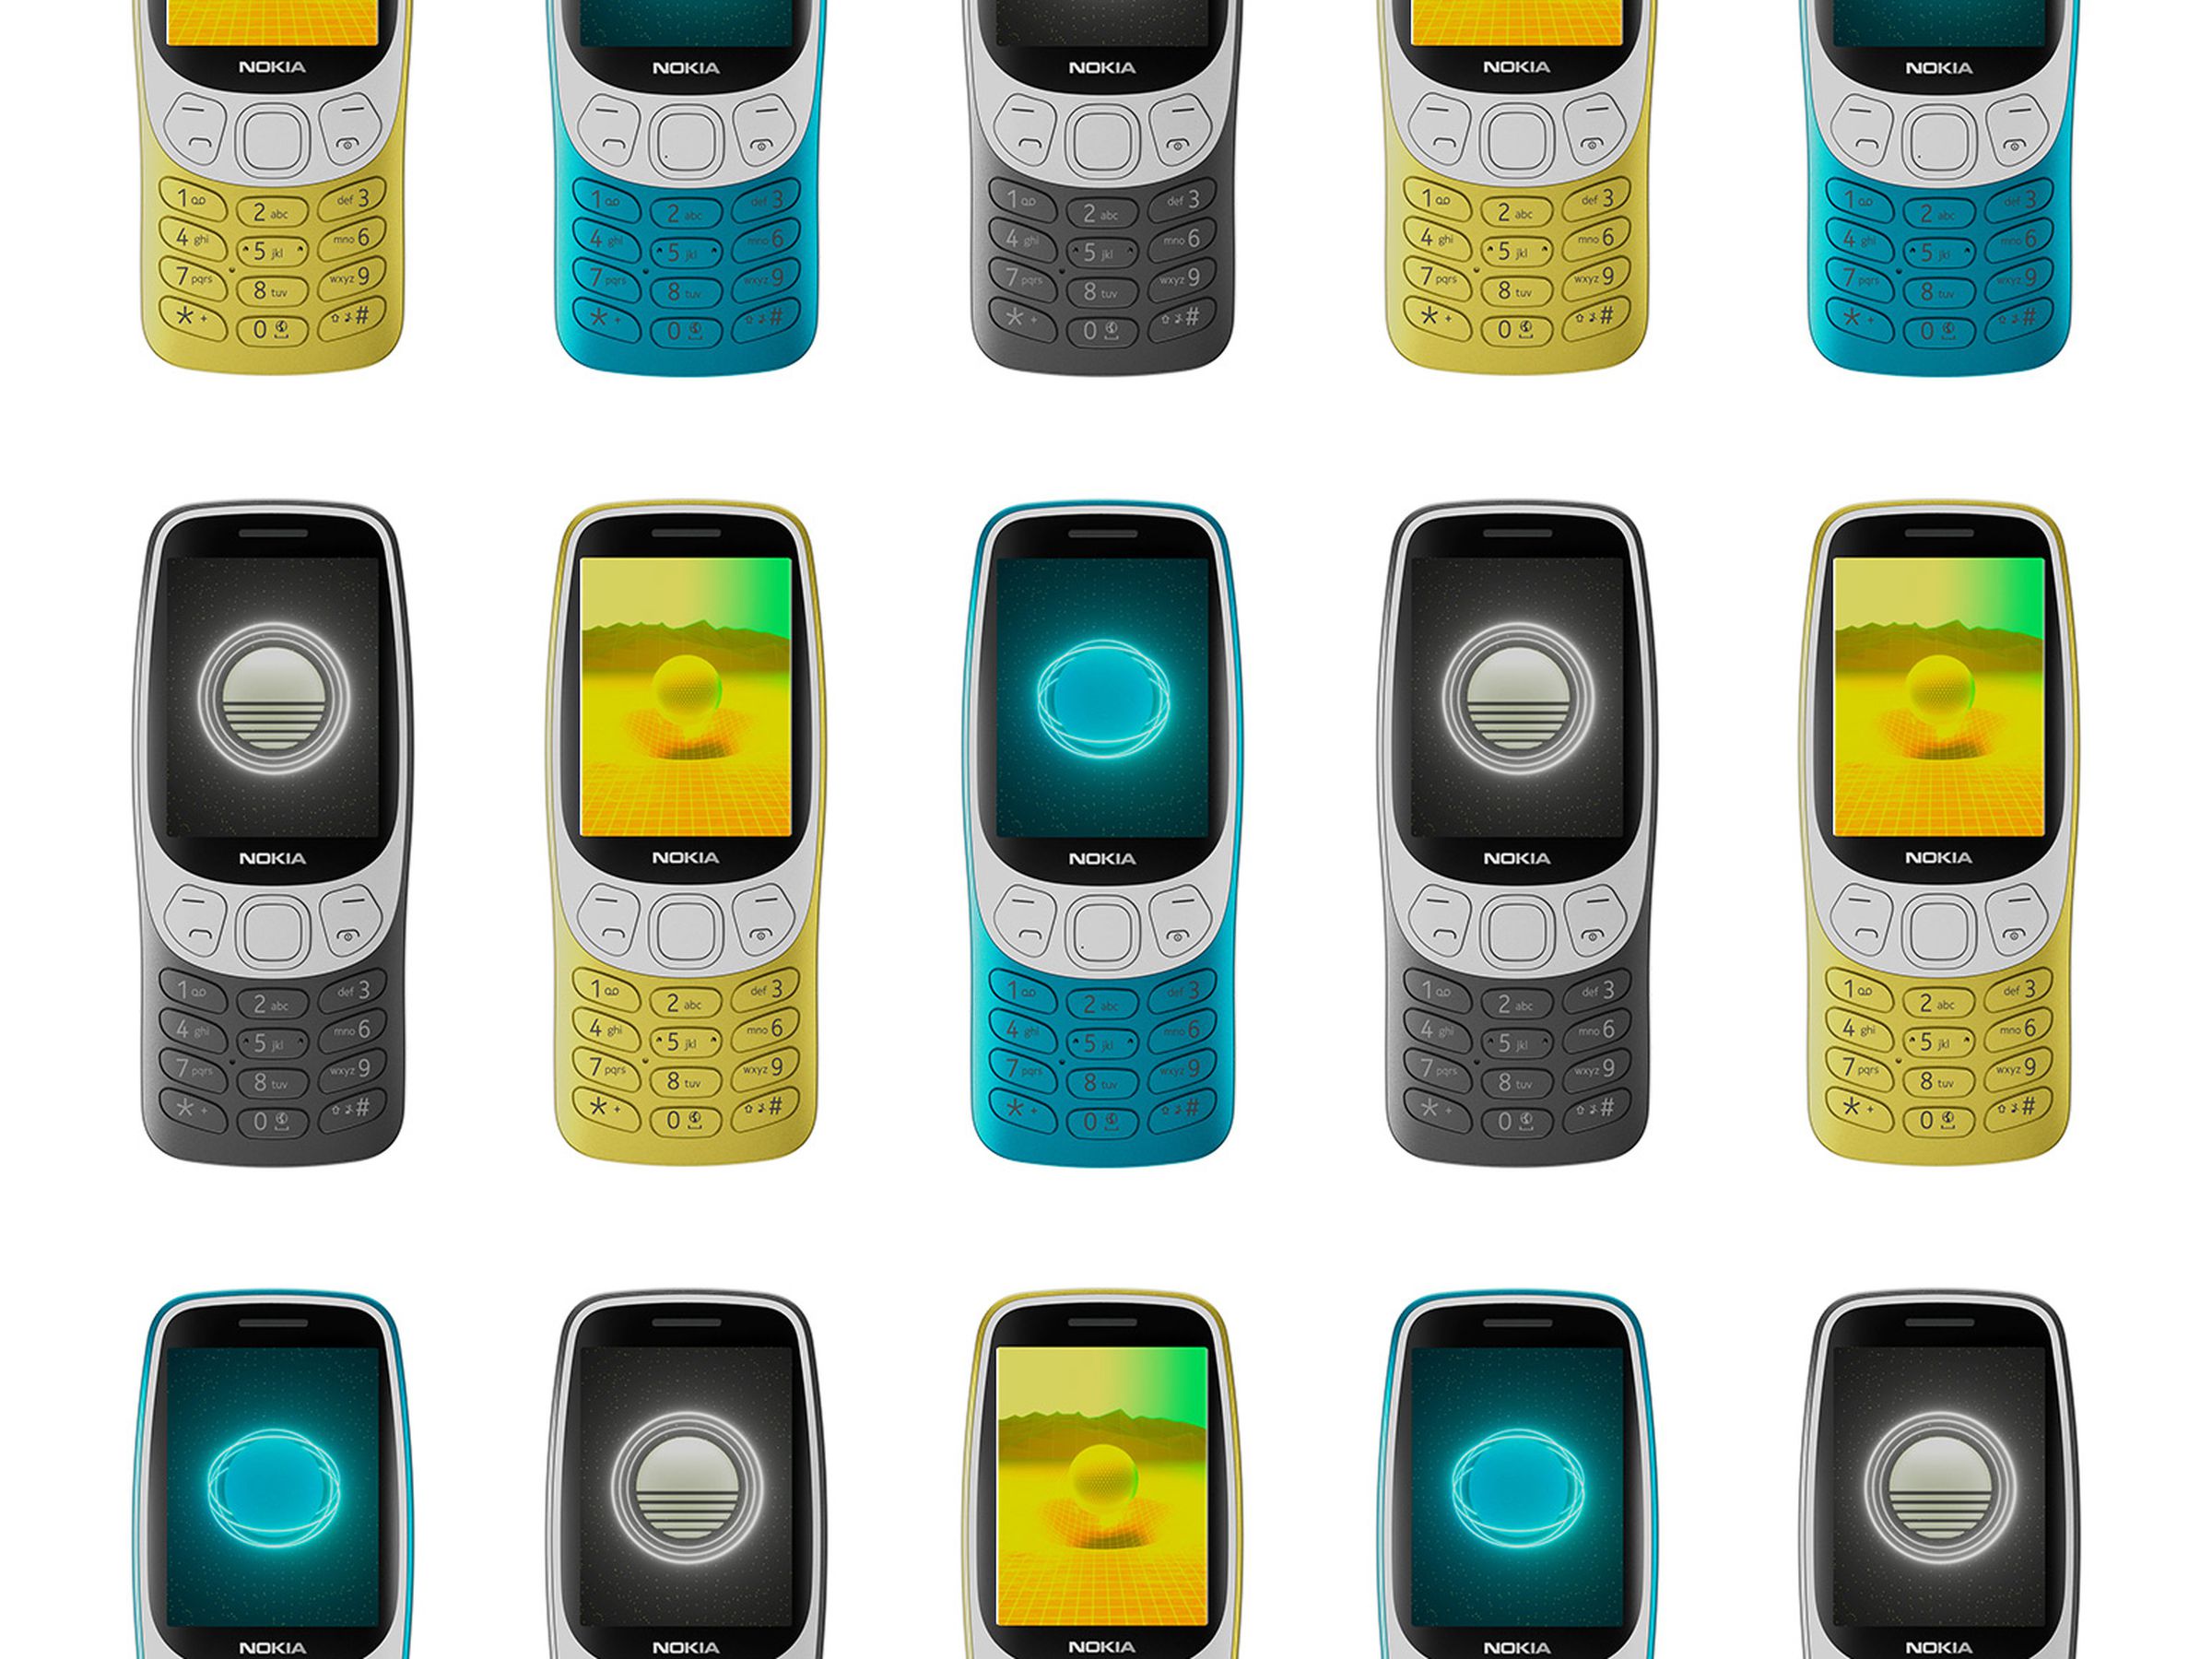 Nokia 3210 in blue, yellow, and black color options.